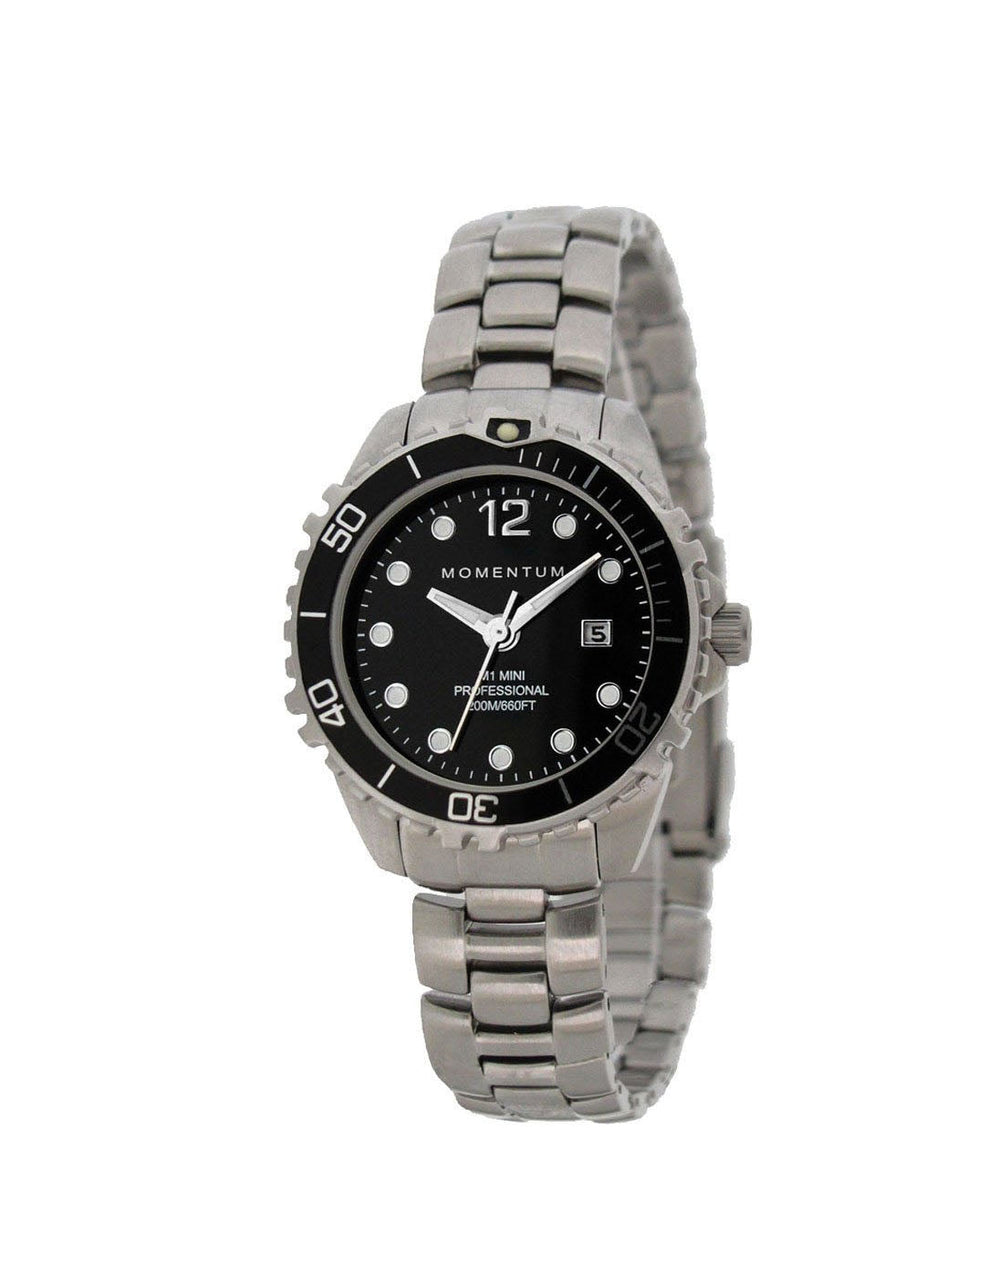 Momentum Momentum Mini Steel with Black Face by Oyster Diving Shop